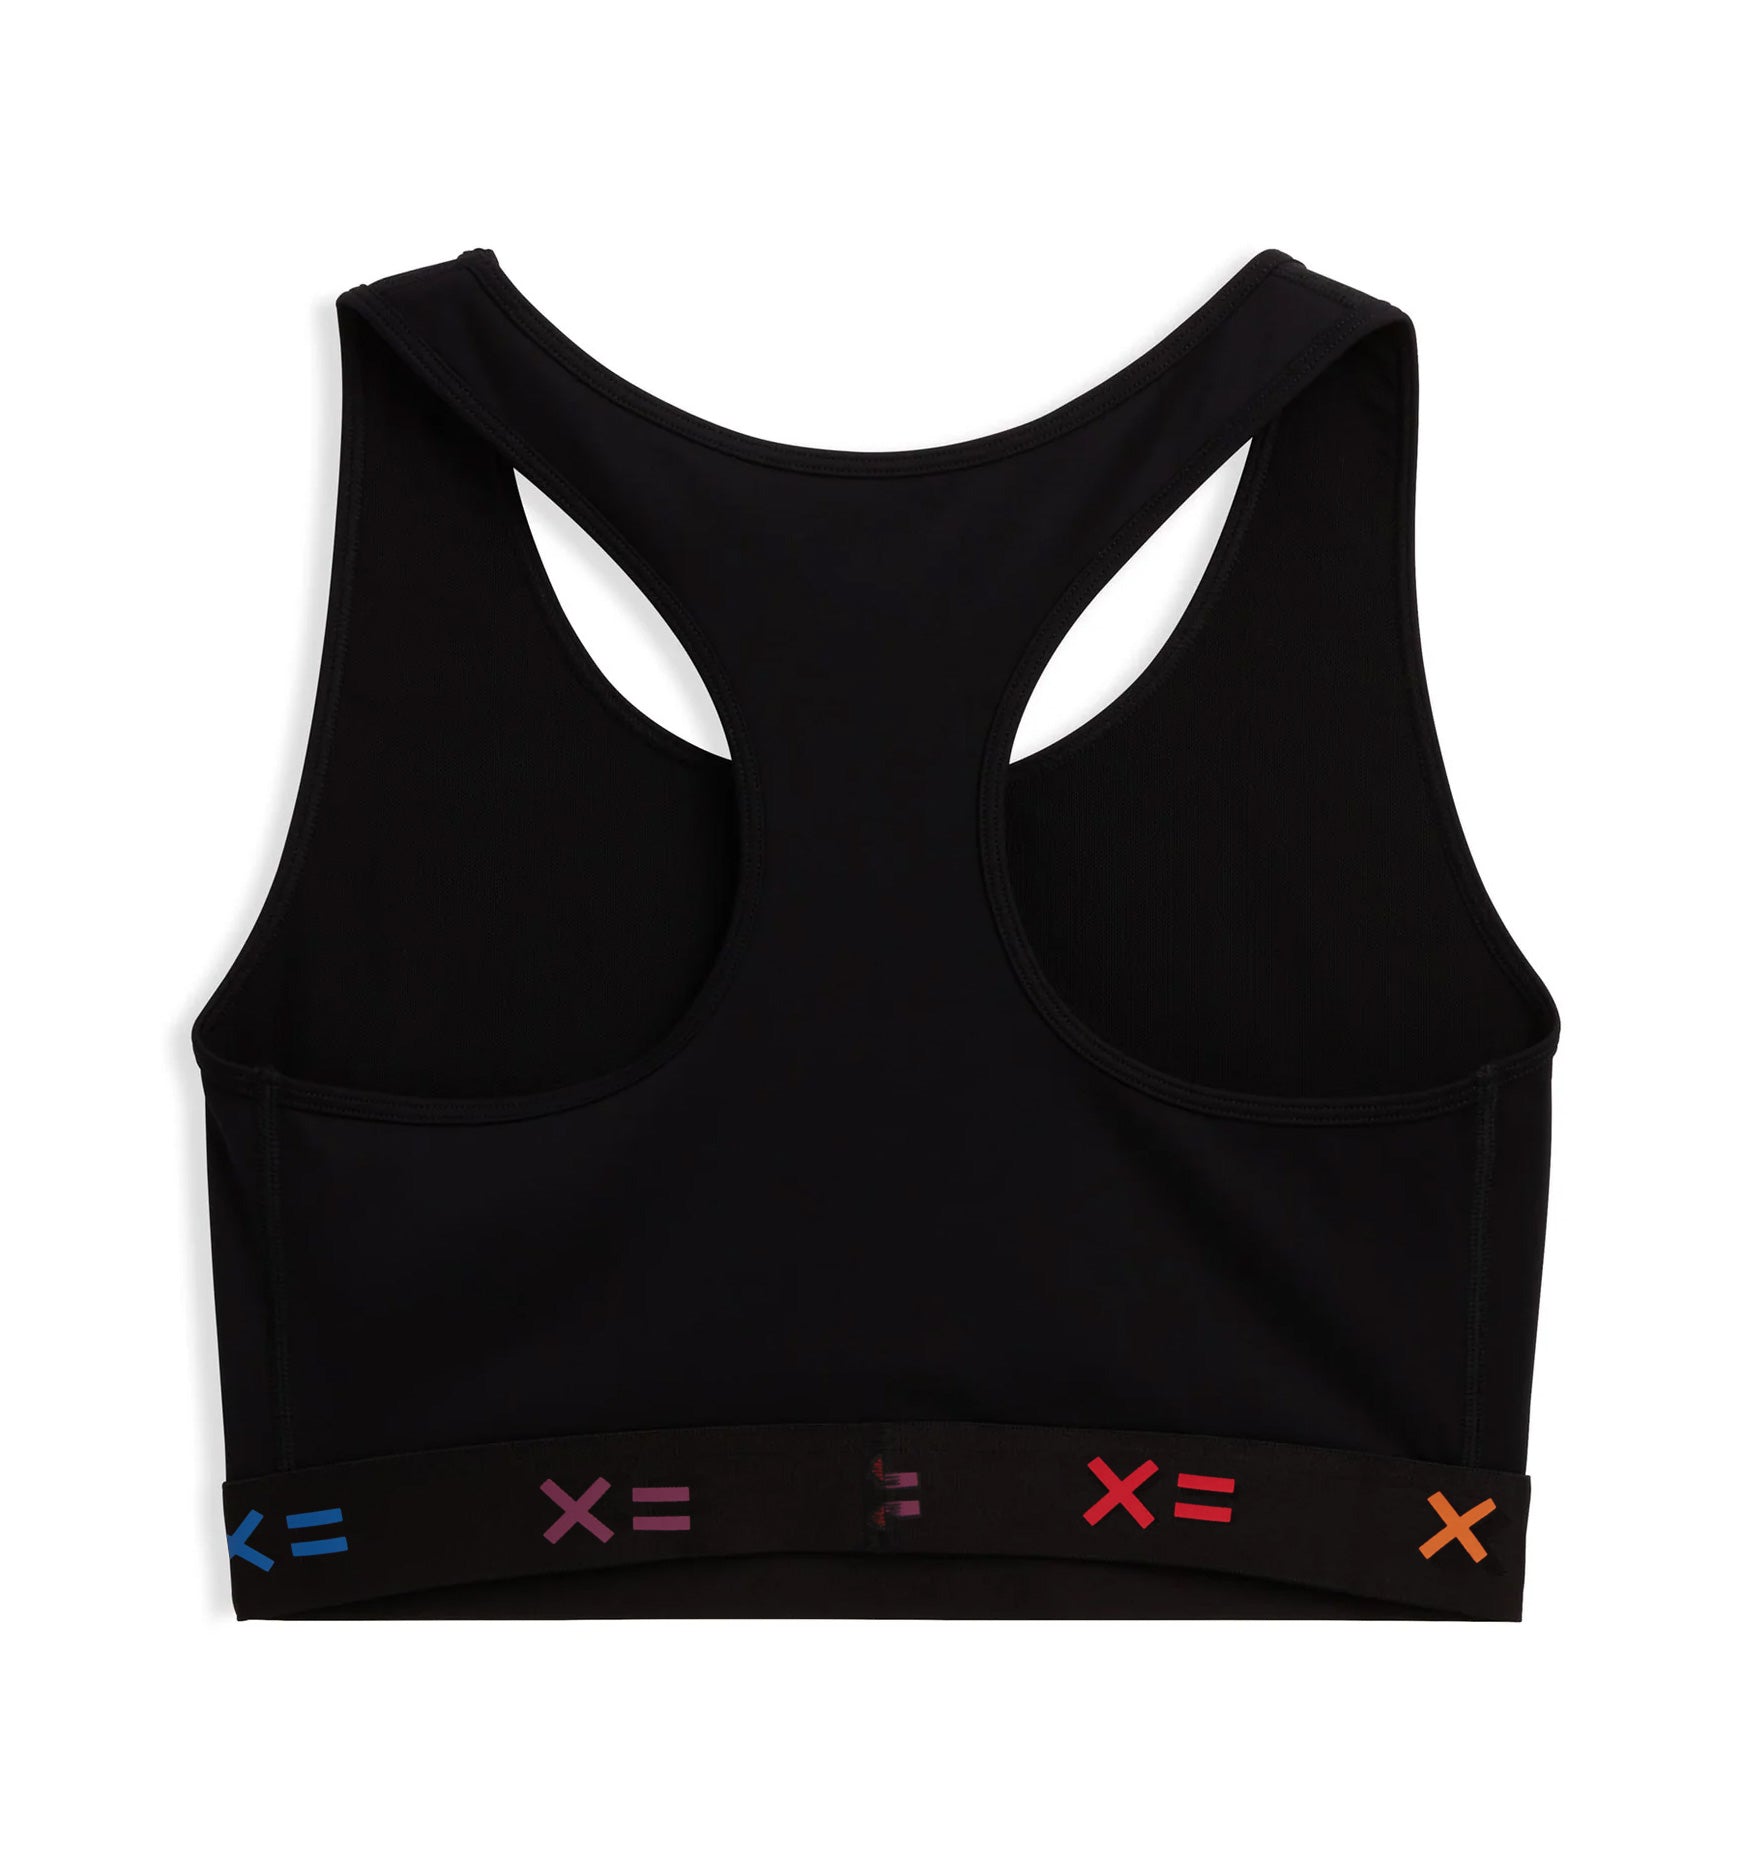 TomboyX Compression Top, Full Coverage Medium Support Top Black 5X Large